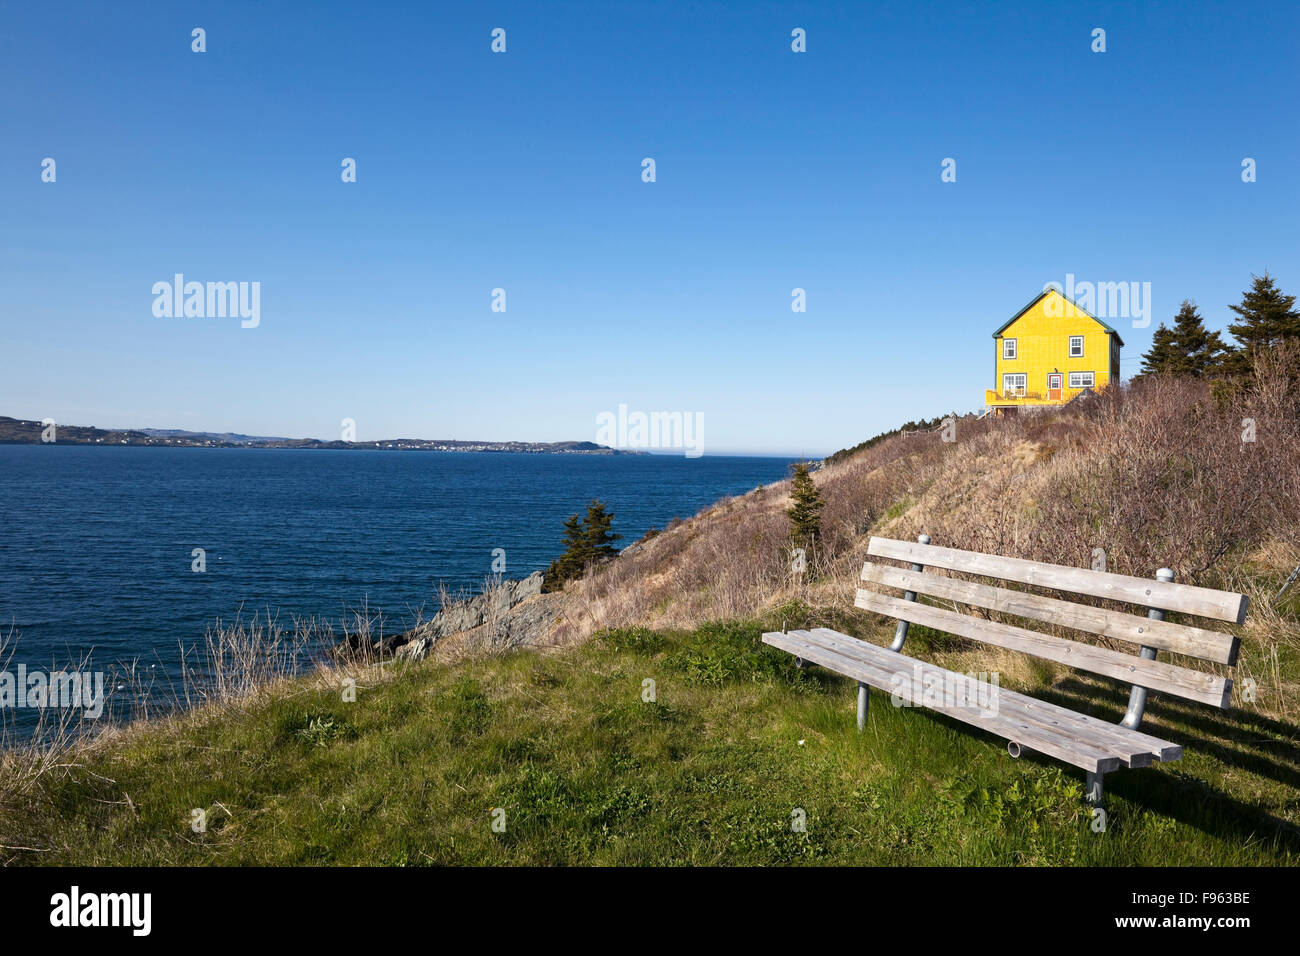 Yellow house and bench overlooking Conception Bay on the outskirts of Cupids, Newfoundland, Canada Stock Photo